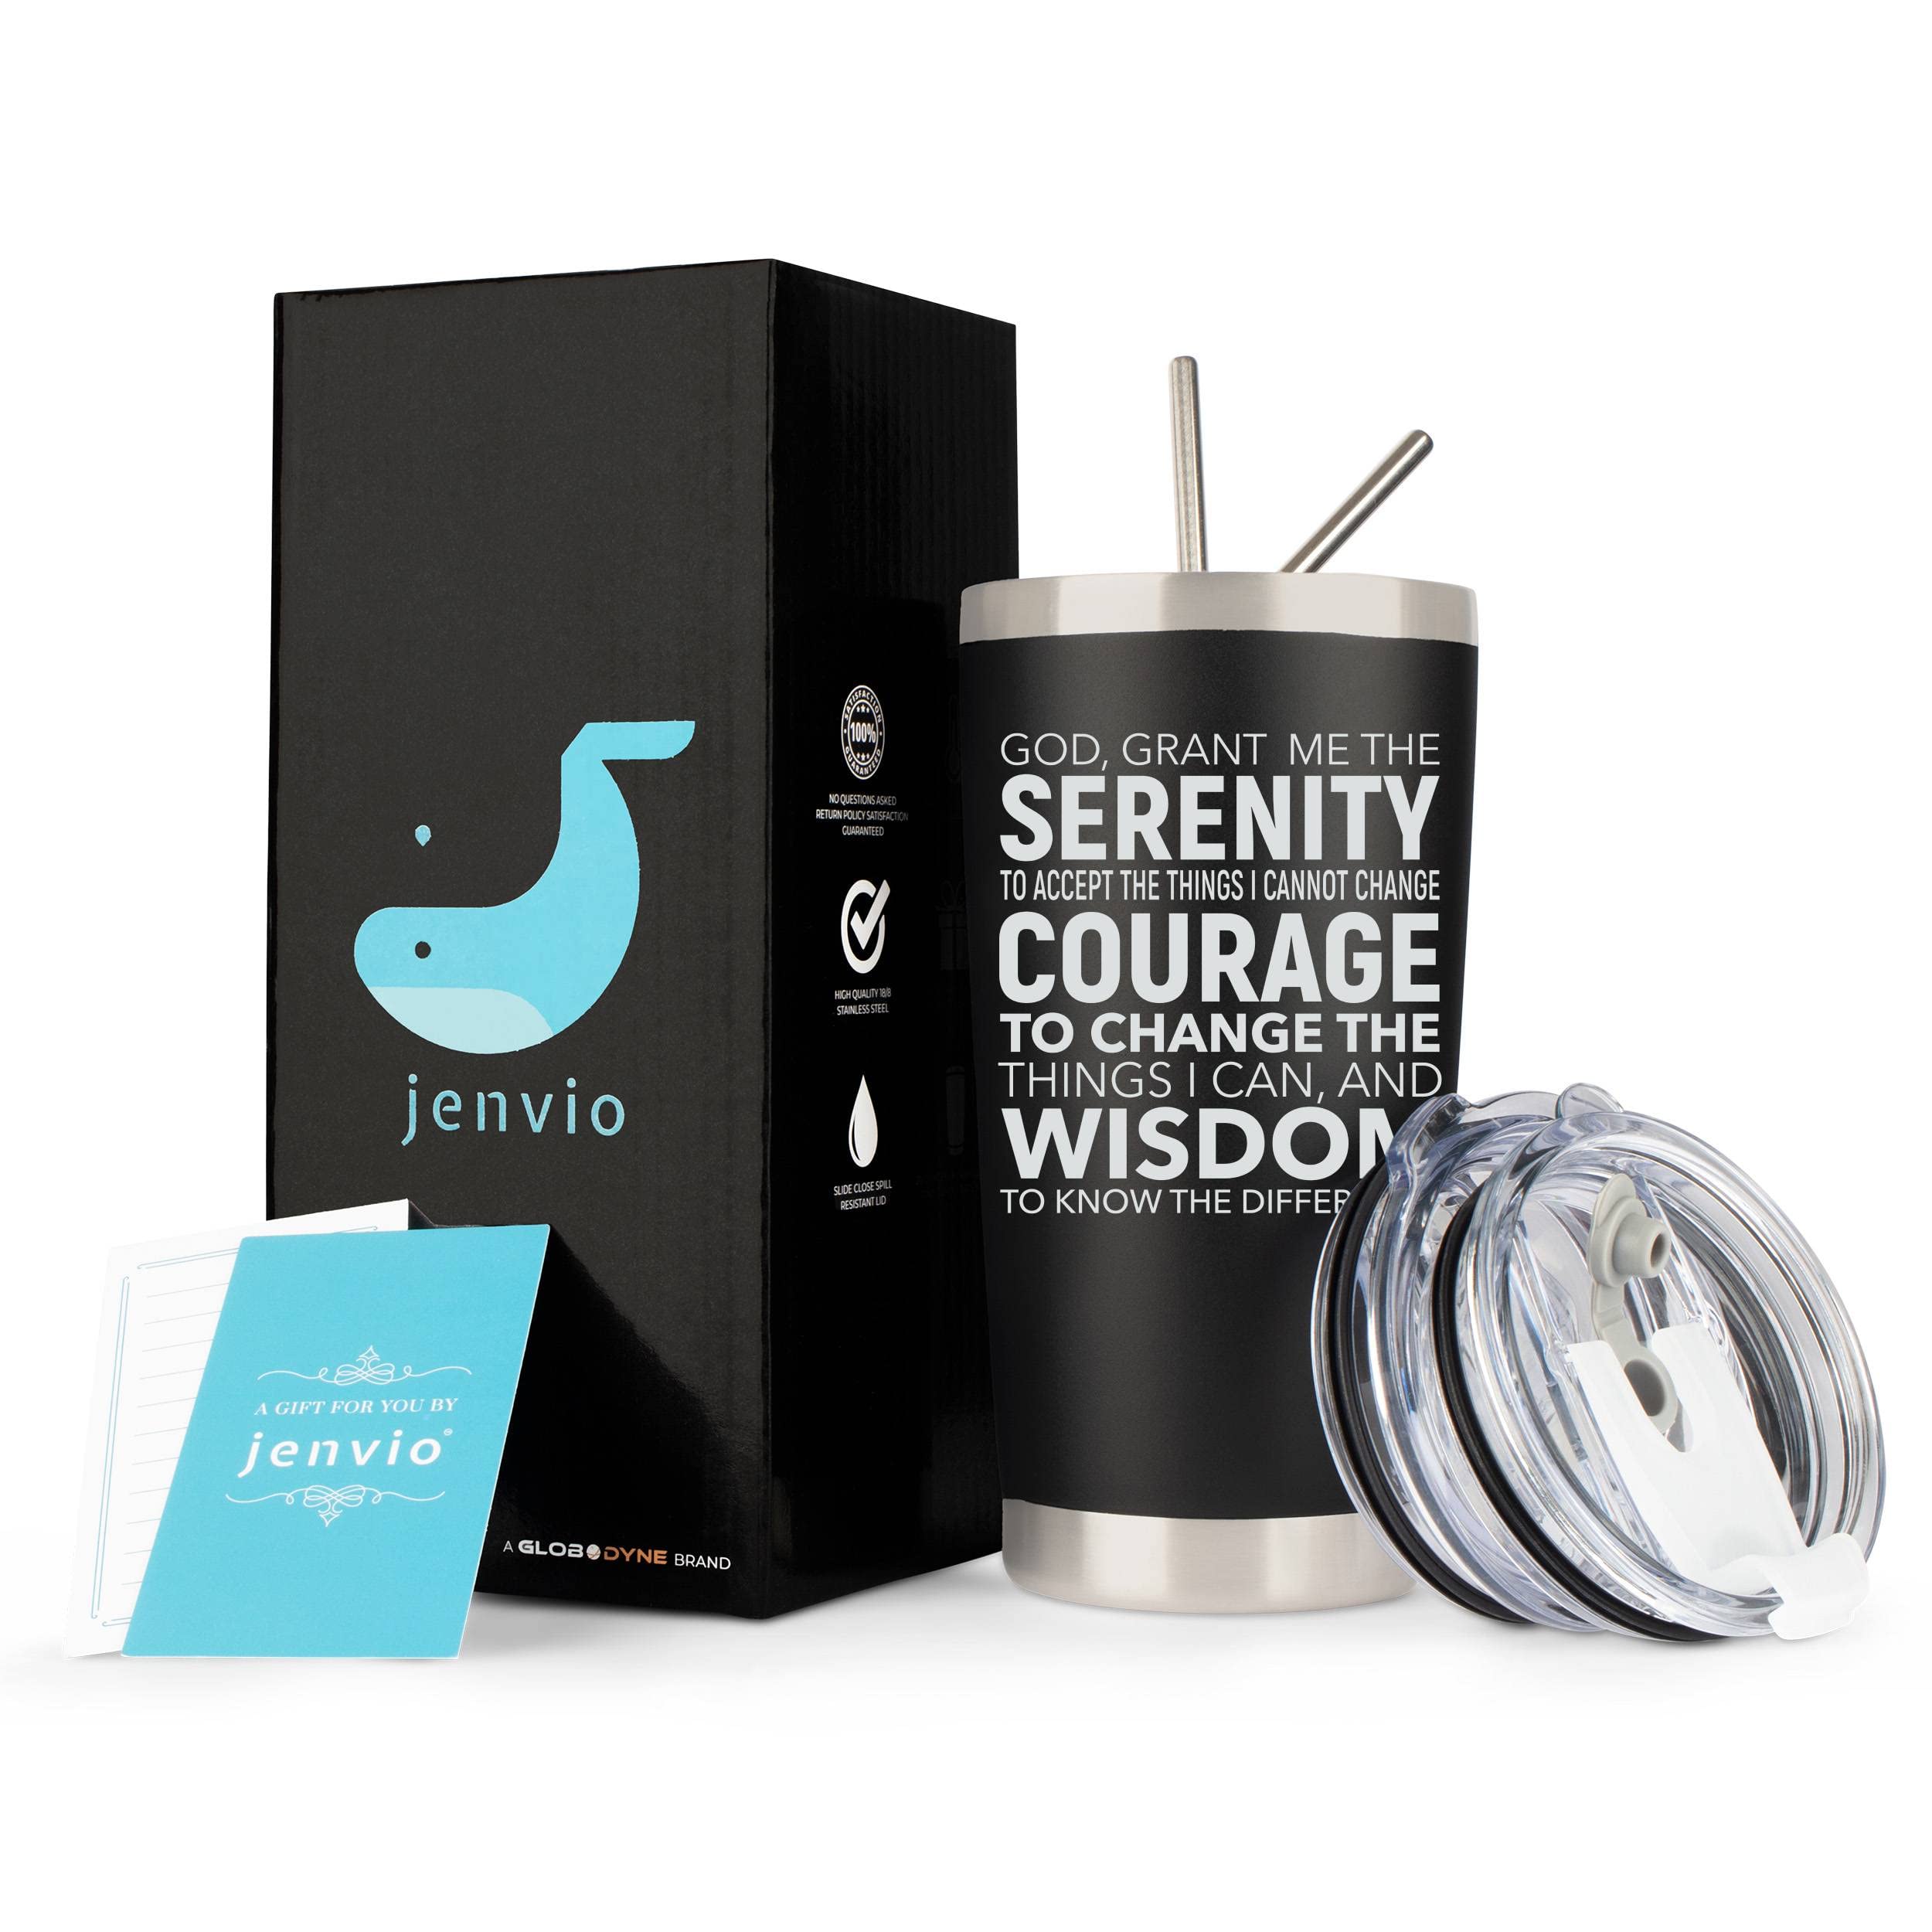 JENVIO Serenity Prayer Gifts | Stainless Steel Travel Tumbler Mug w/Lid and 2 Straws | Courage Wisdom Unique Coffee Sober AA Sobriety Gifts for Recovery Alcoholics Anonymous Valentine's Day